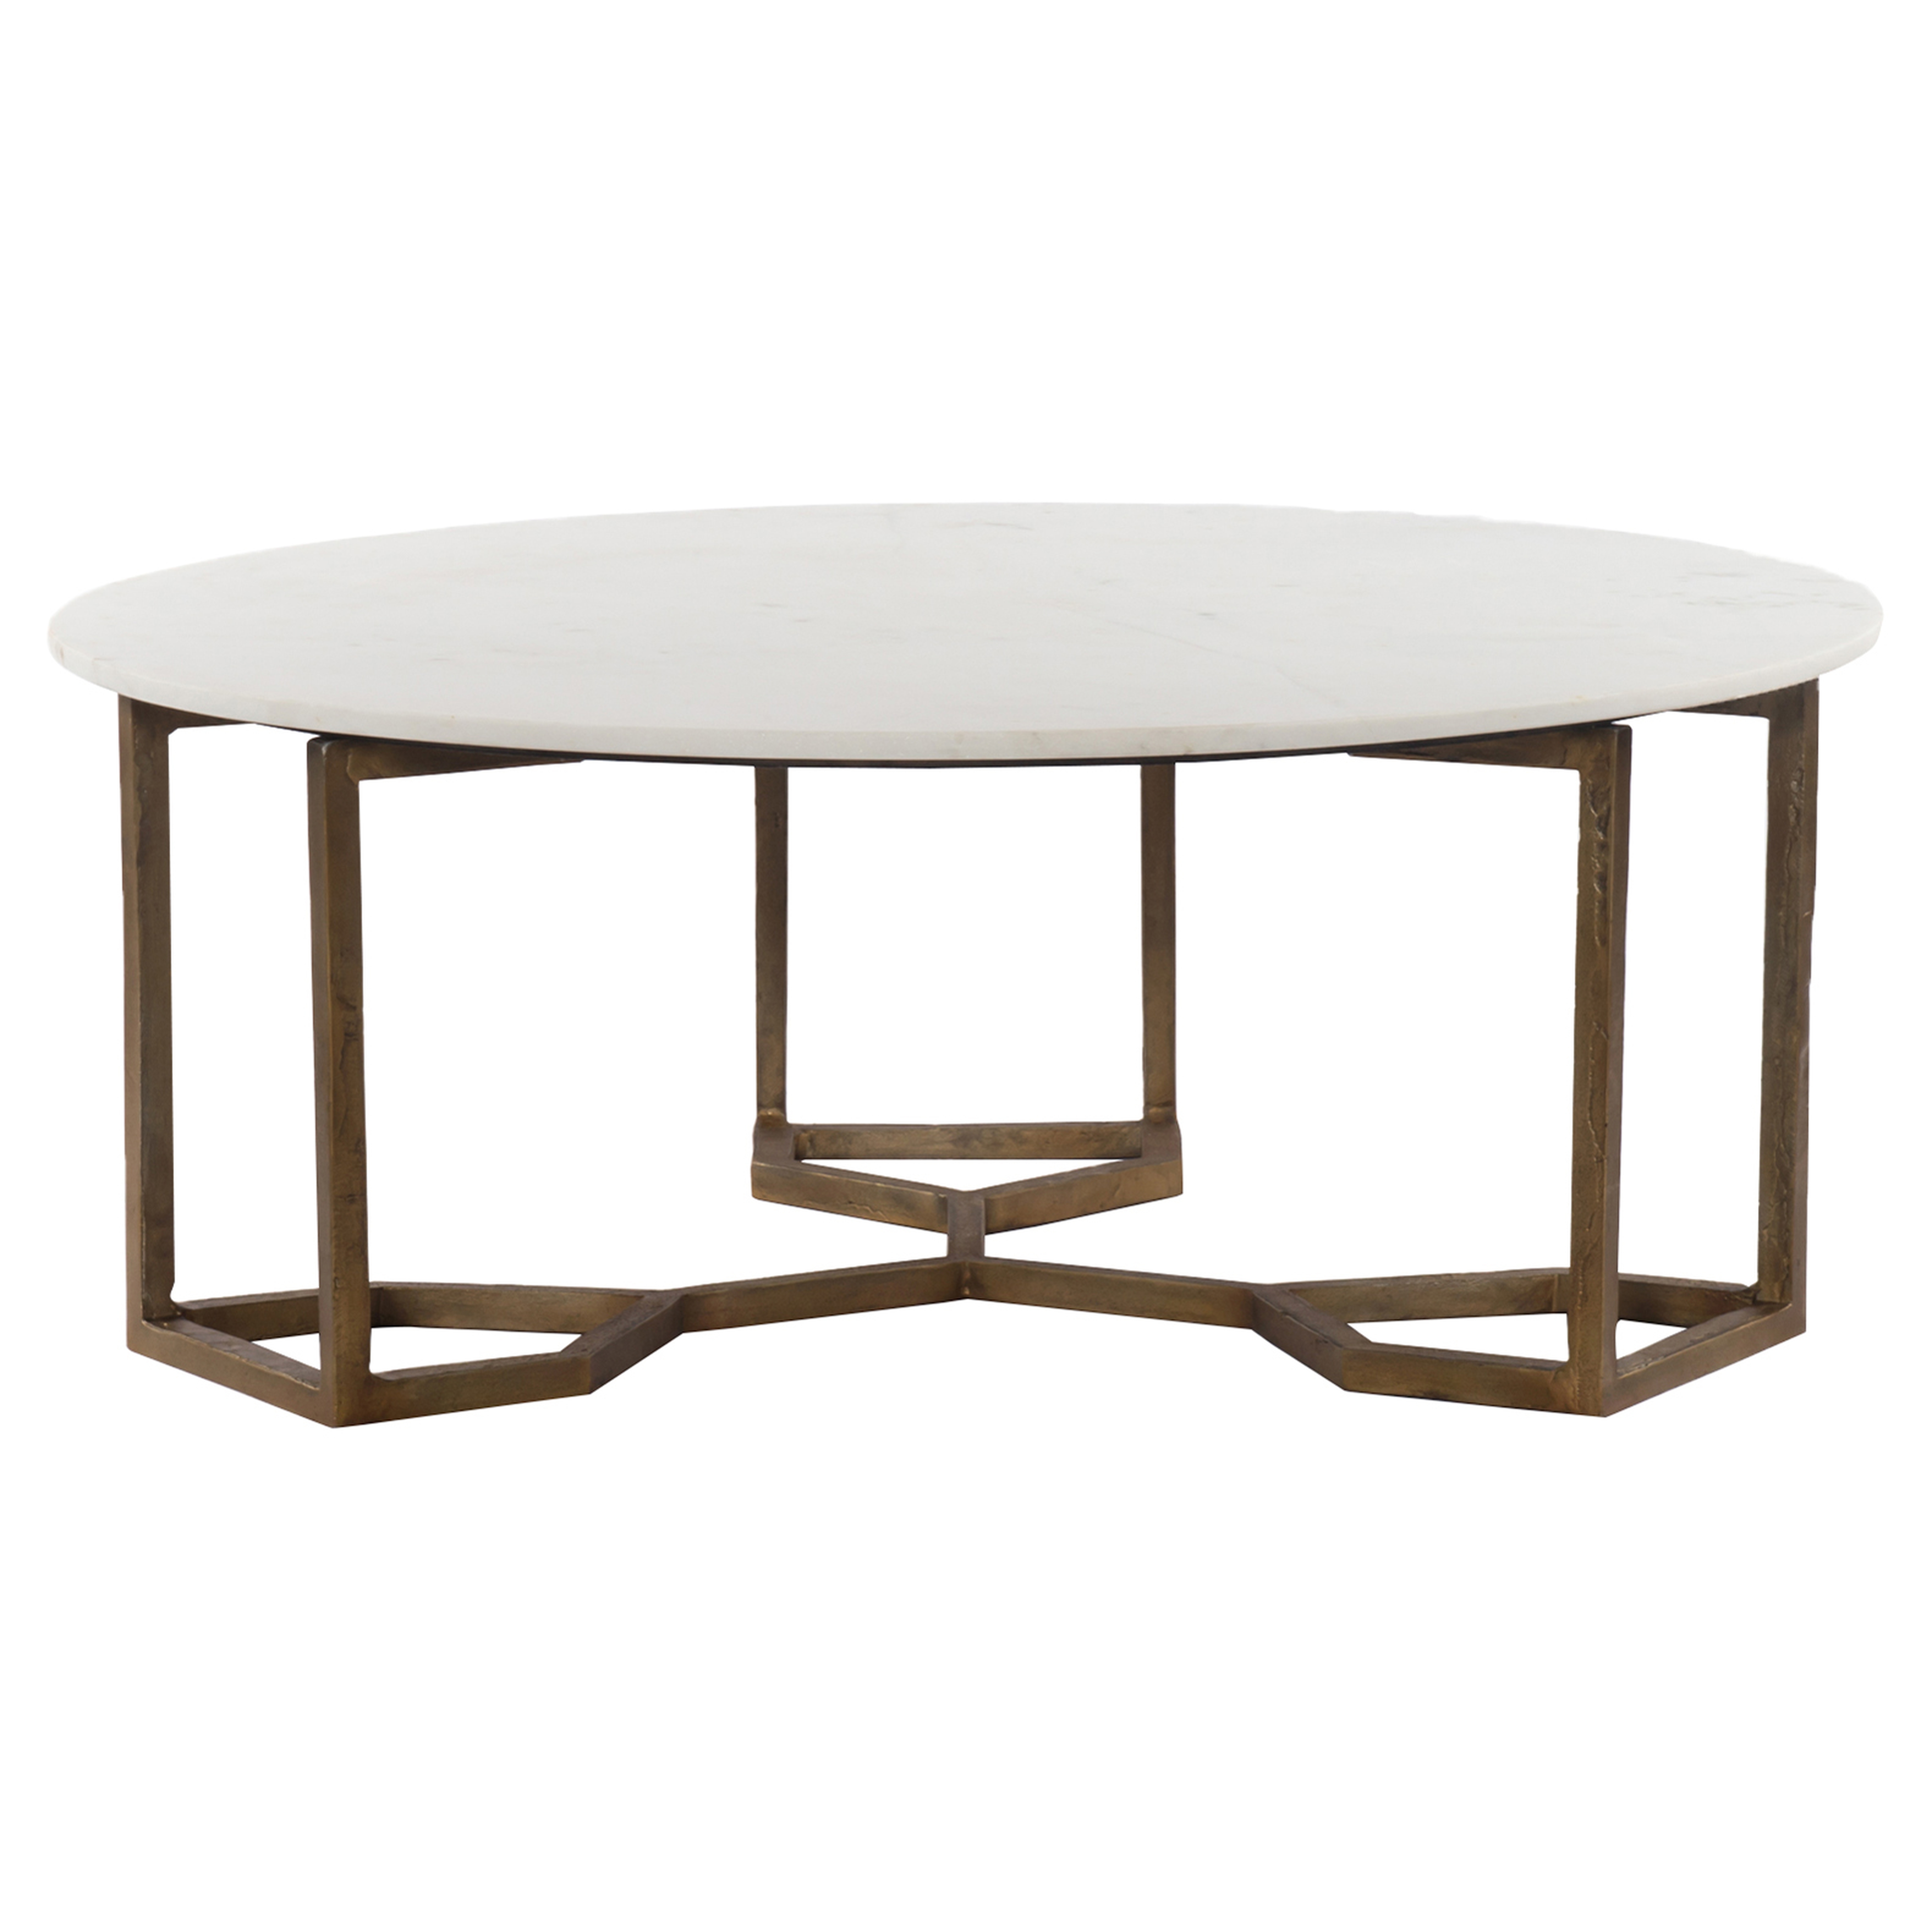 Zia Modern Geometric Gold Frame Round White Marble Top Coffee Table - Kathy Kuo Home